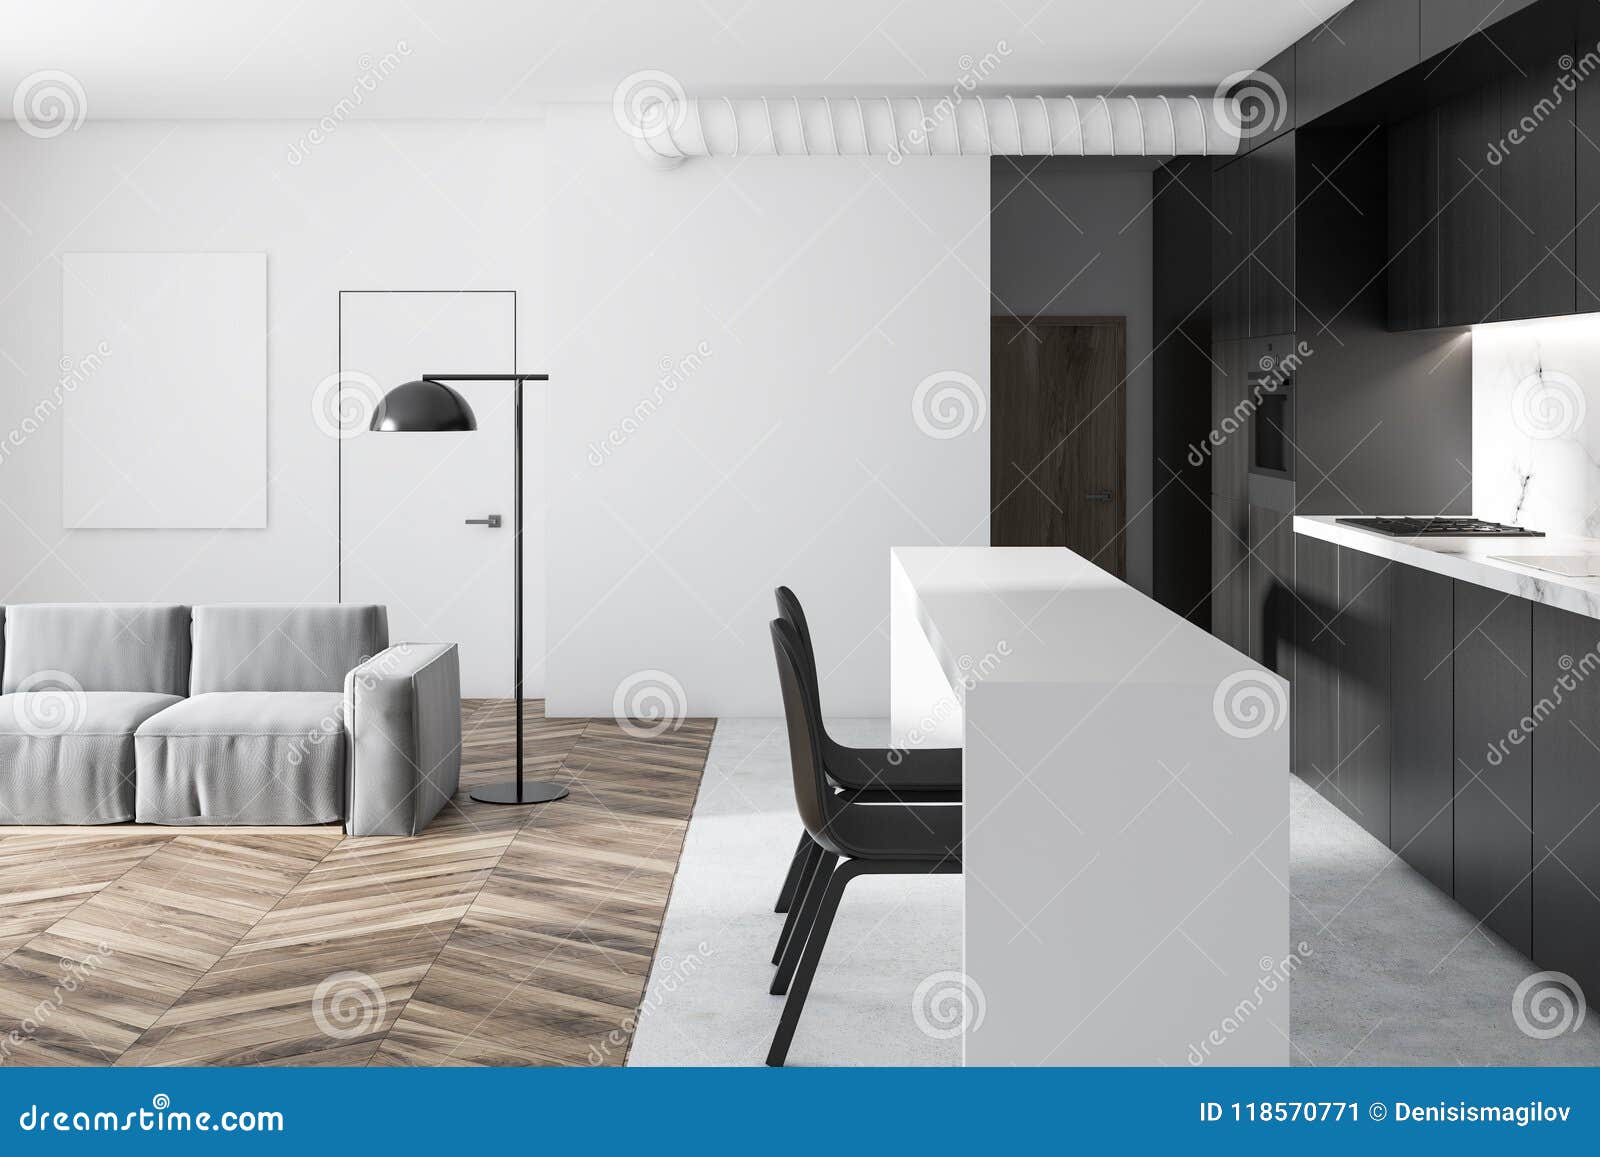 White And Black Kitchen And Living Room Stock Illustration